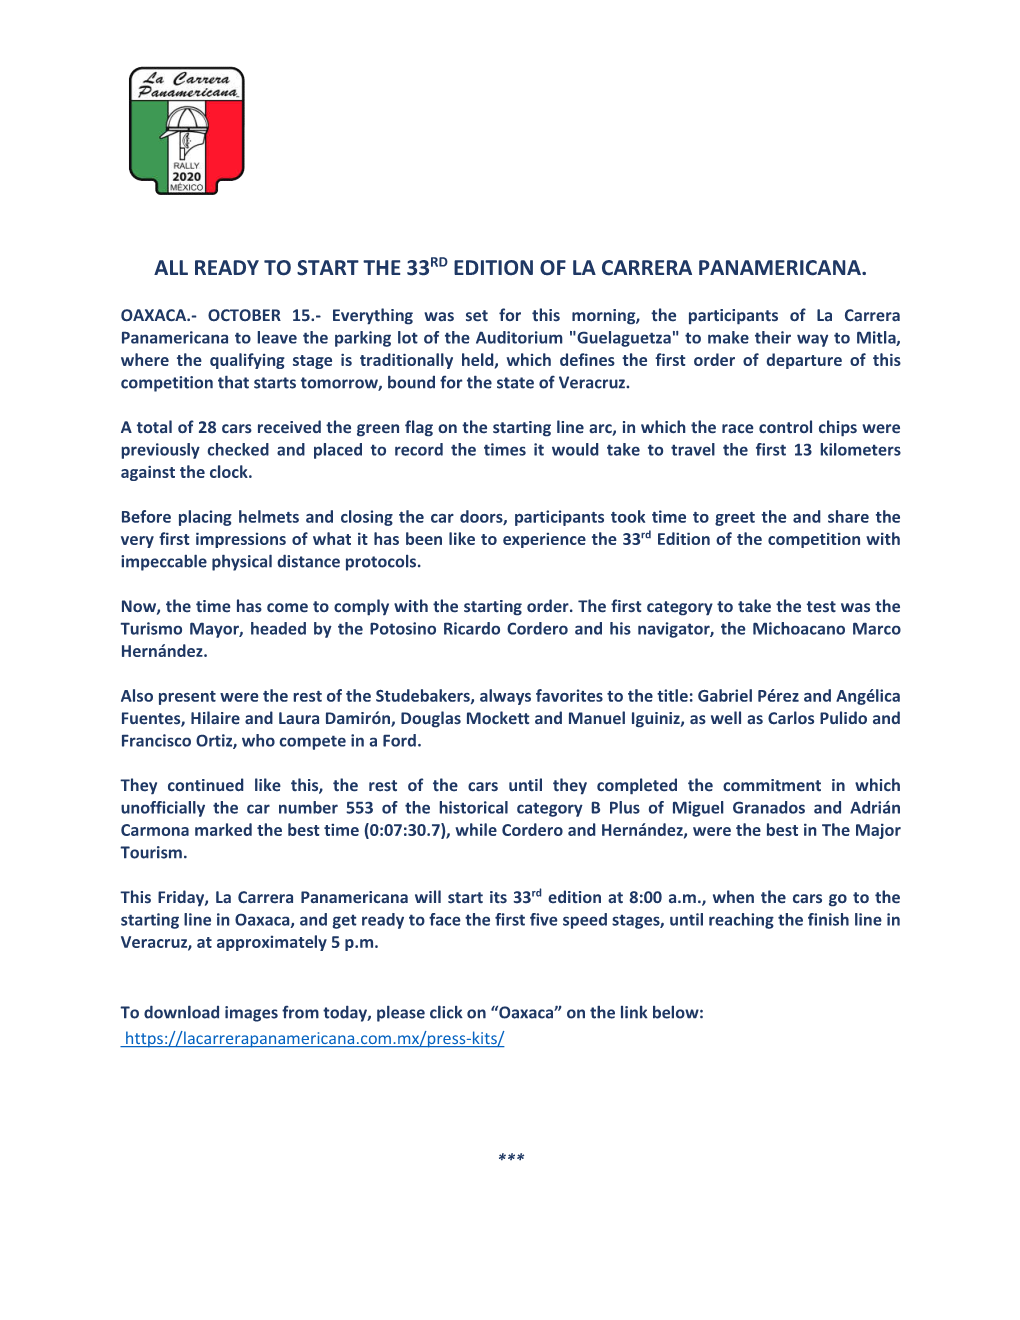 All Ready to Start the 33Rd Edition of La Carrera Panamericana